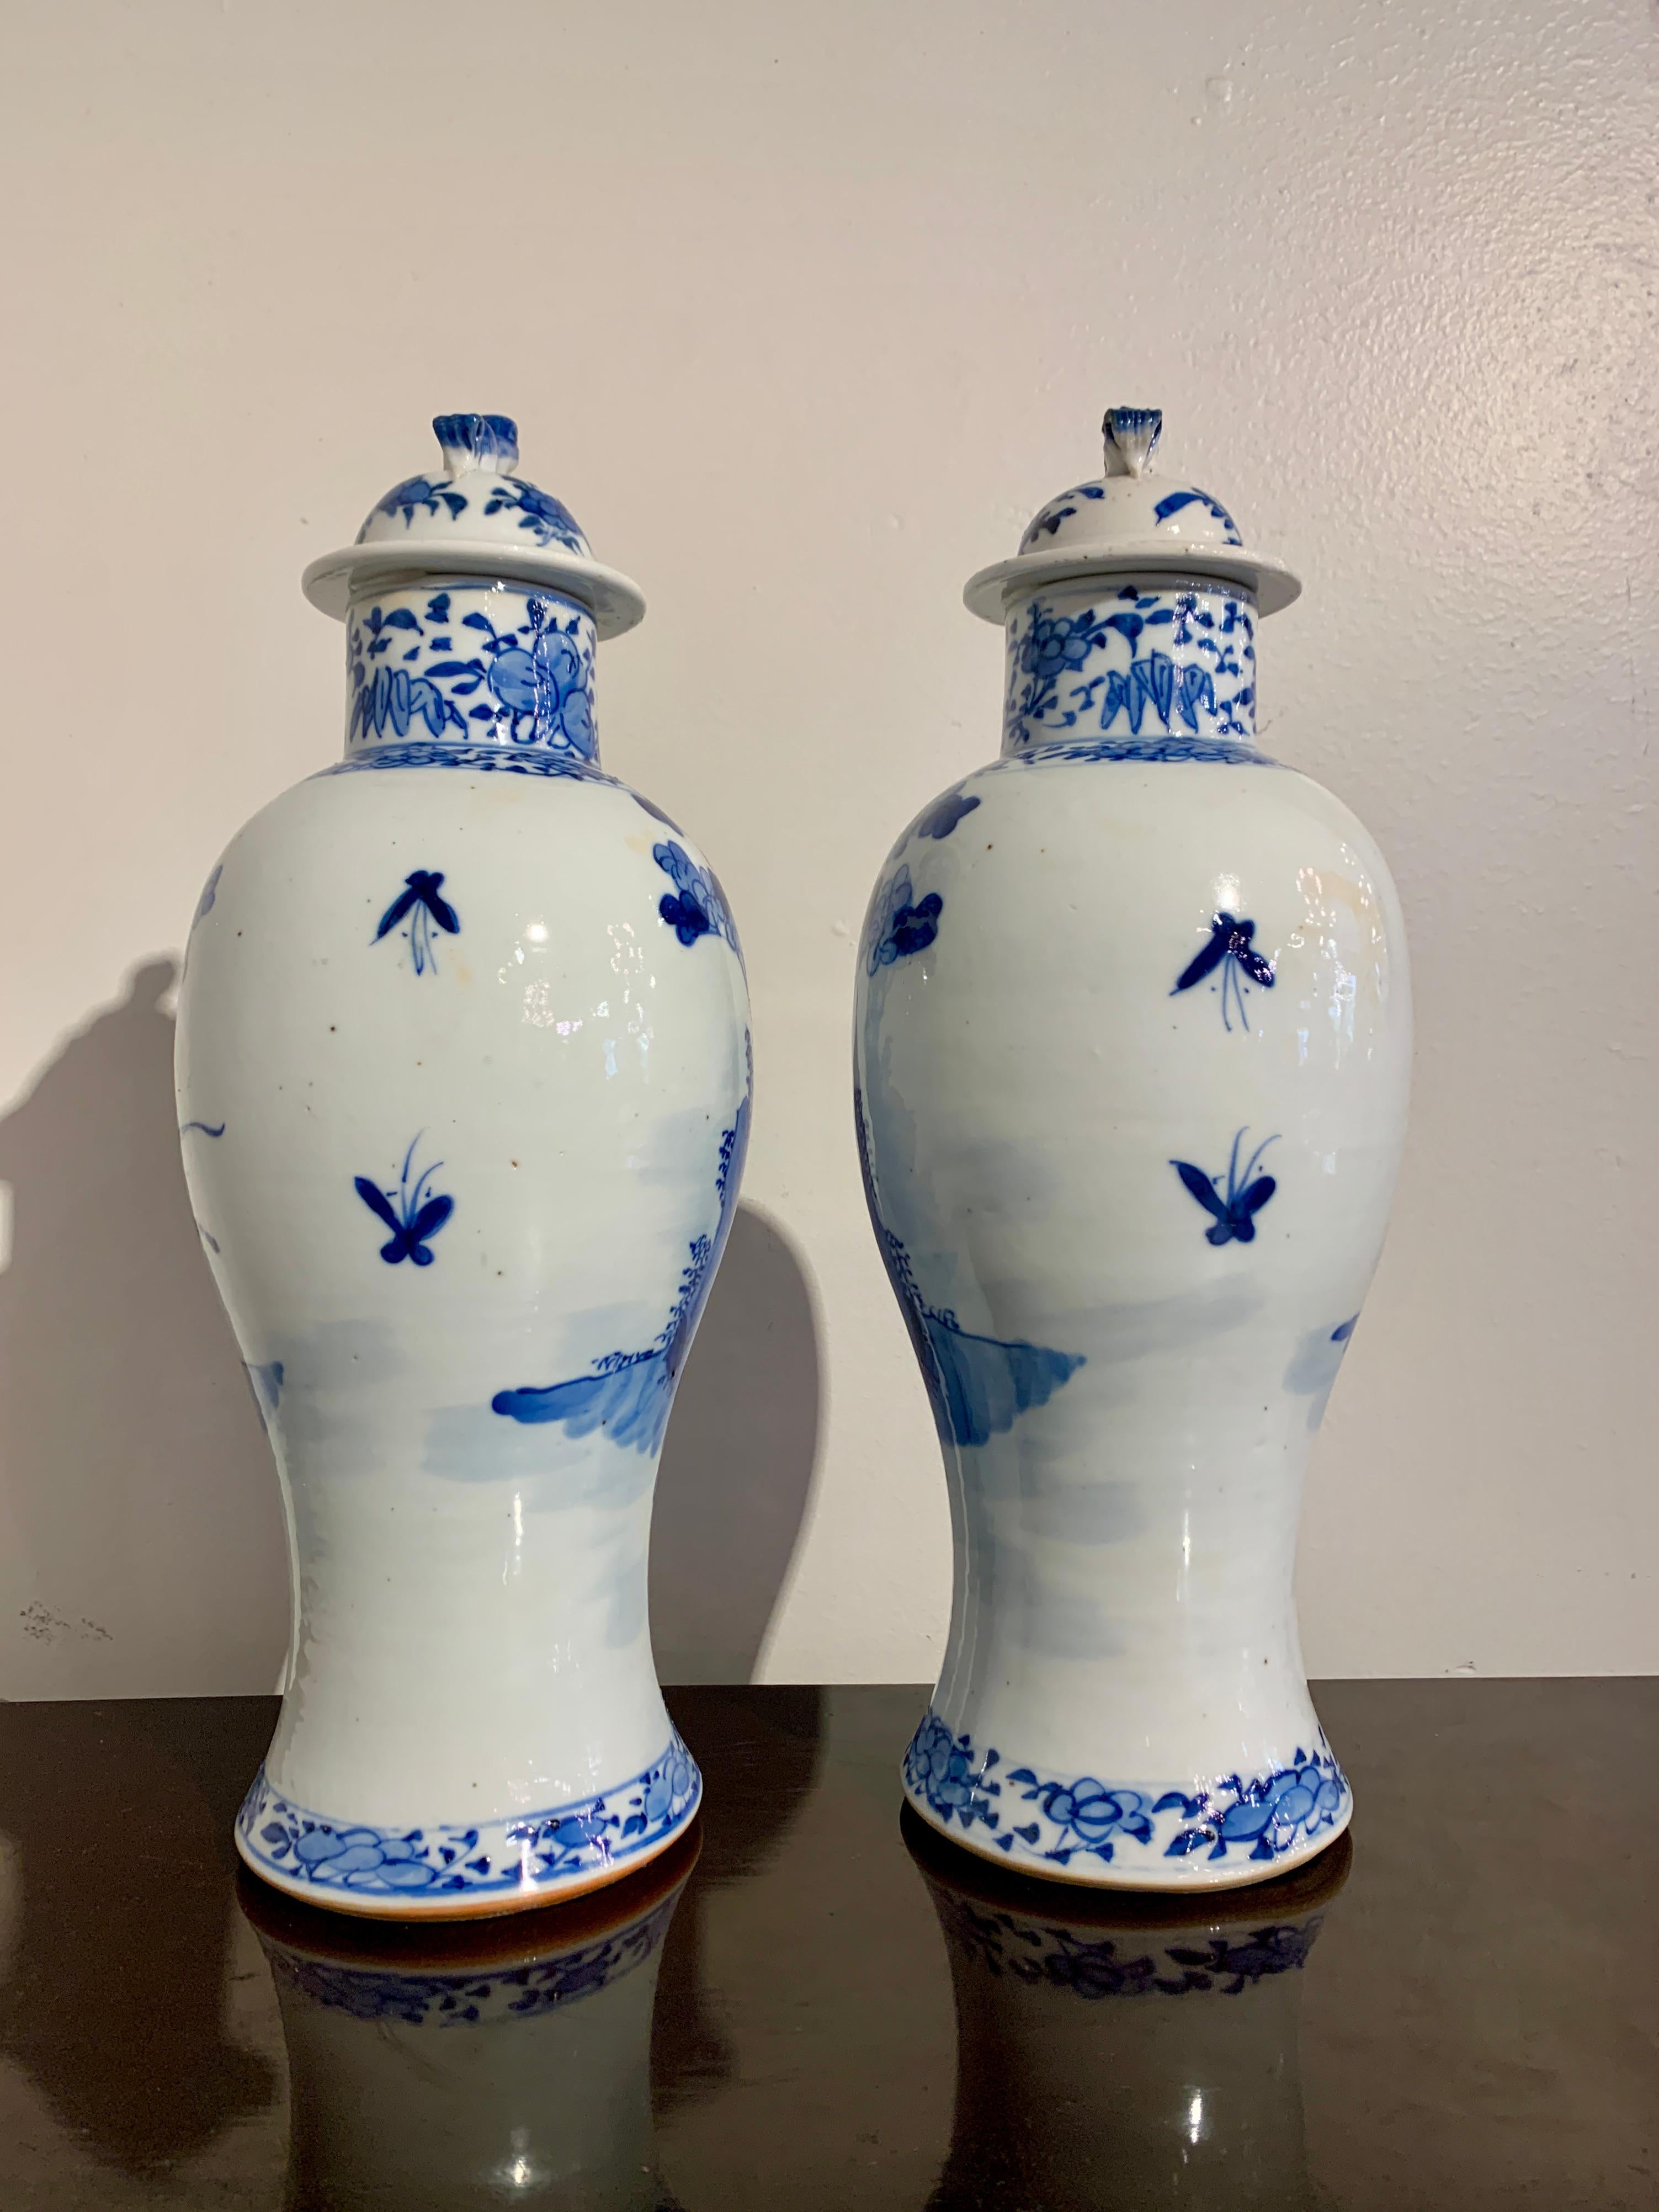 Qing Pair Chinese Blue and White Covered Baluster Vases, Late 19th Century, China